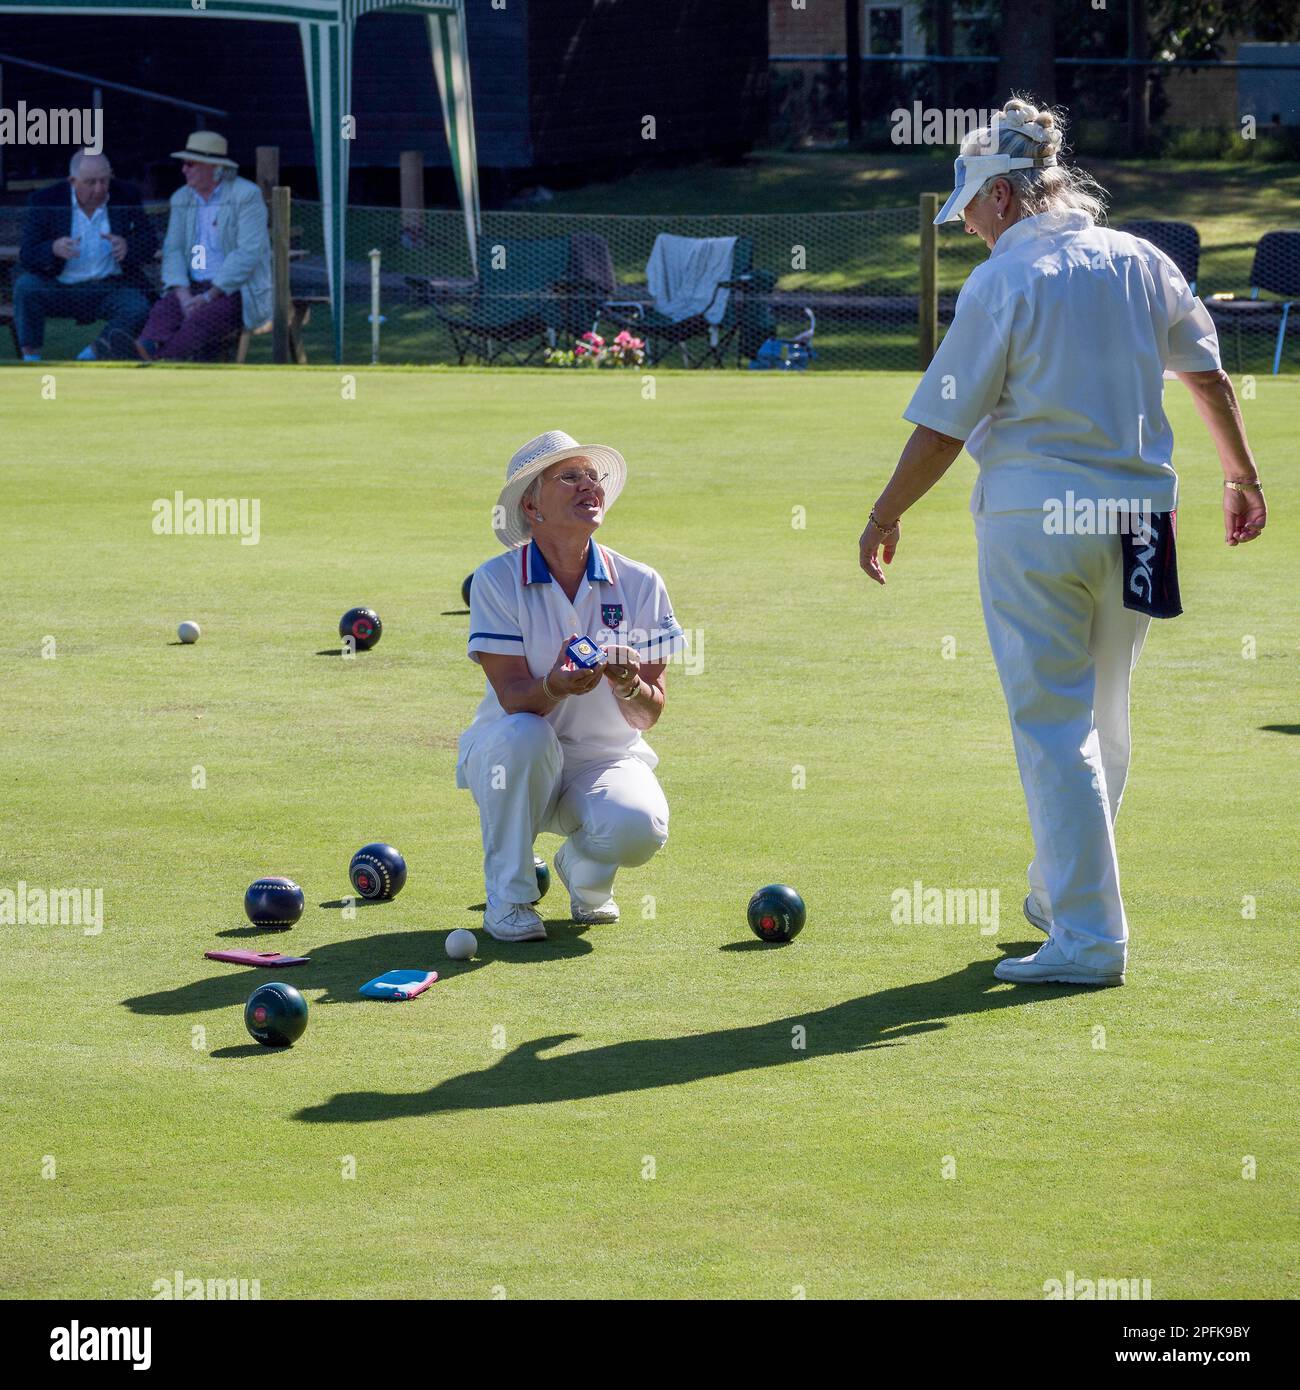 ISLE OF THORNS, SUSSEX/UK - SEPTEMBER 11 : Lawn Bowls Match at Isle of Thorns Chelwood Gate in Sussex on September 11, 2016. Unidentified women Stock Photo